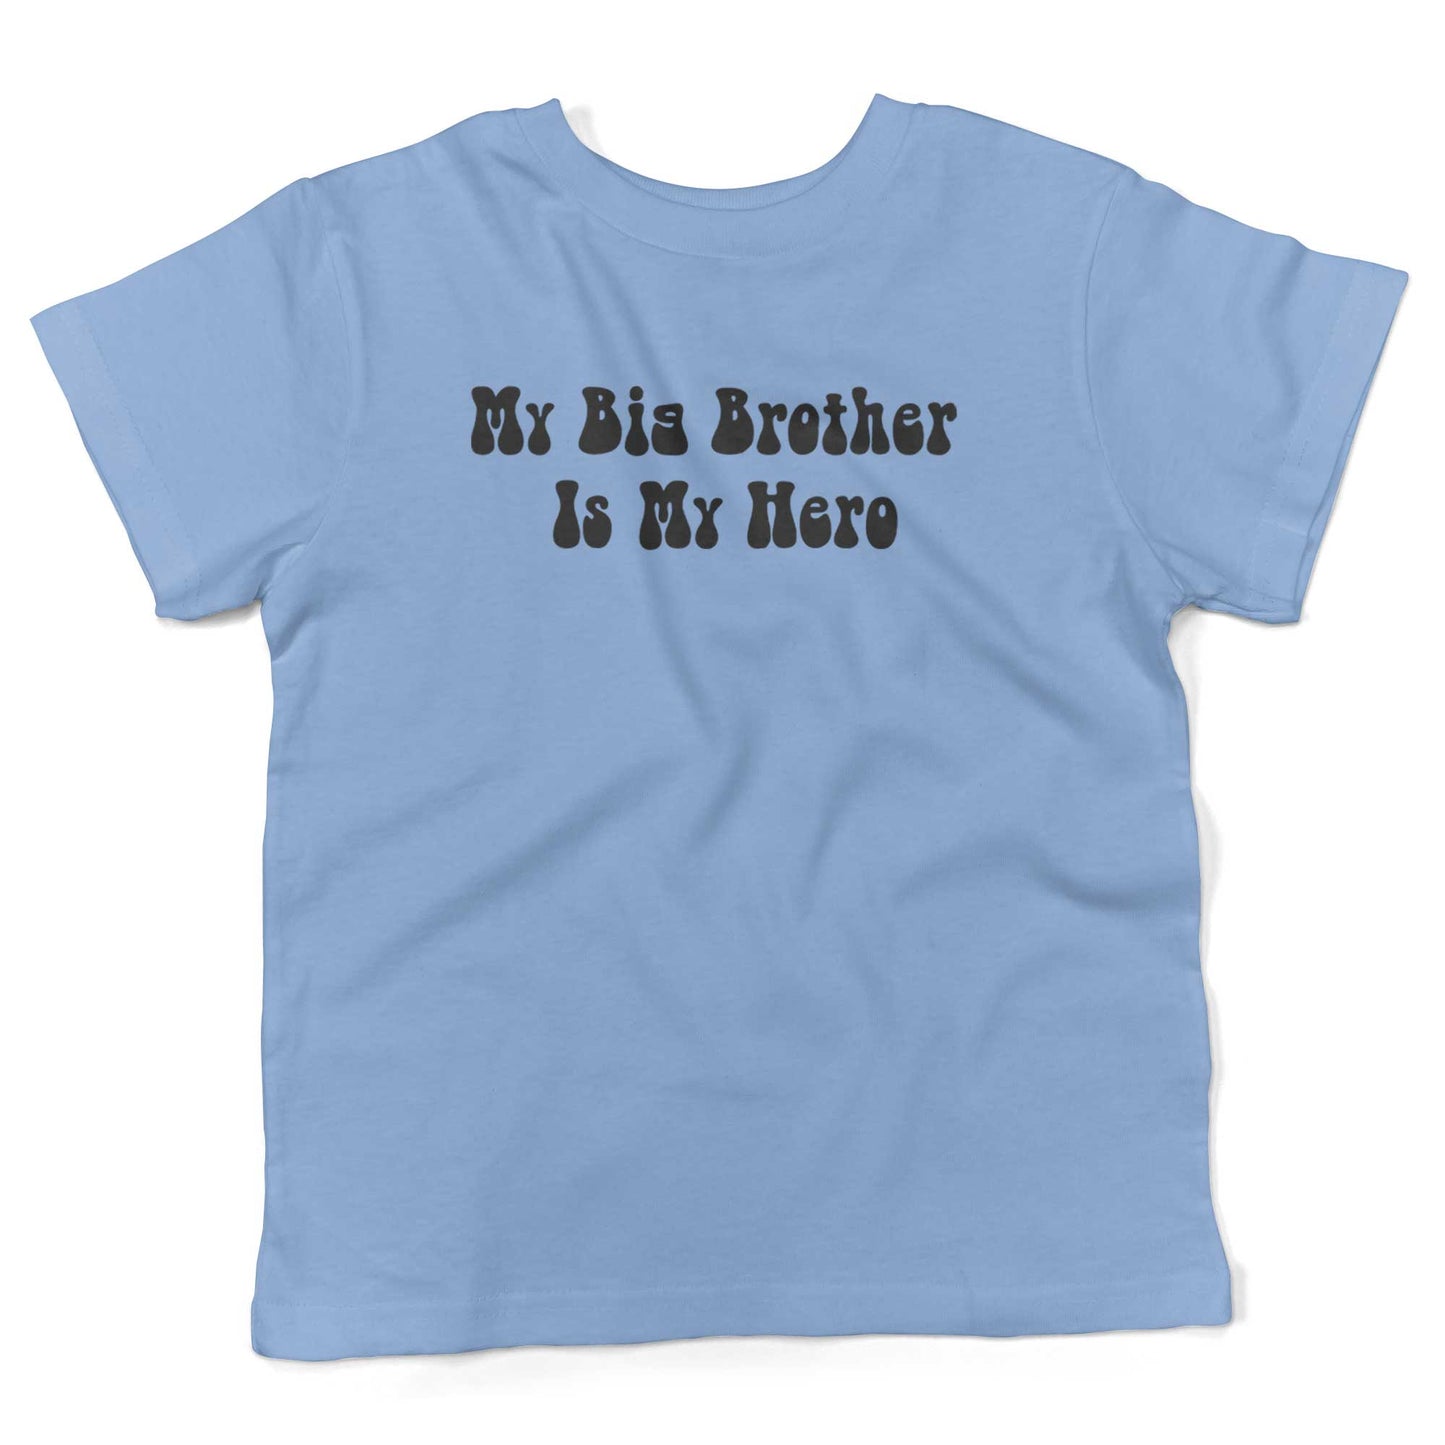 My Big Brother Is My Hero Toddler Shirt-Organic Baby Blue-2T